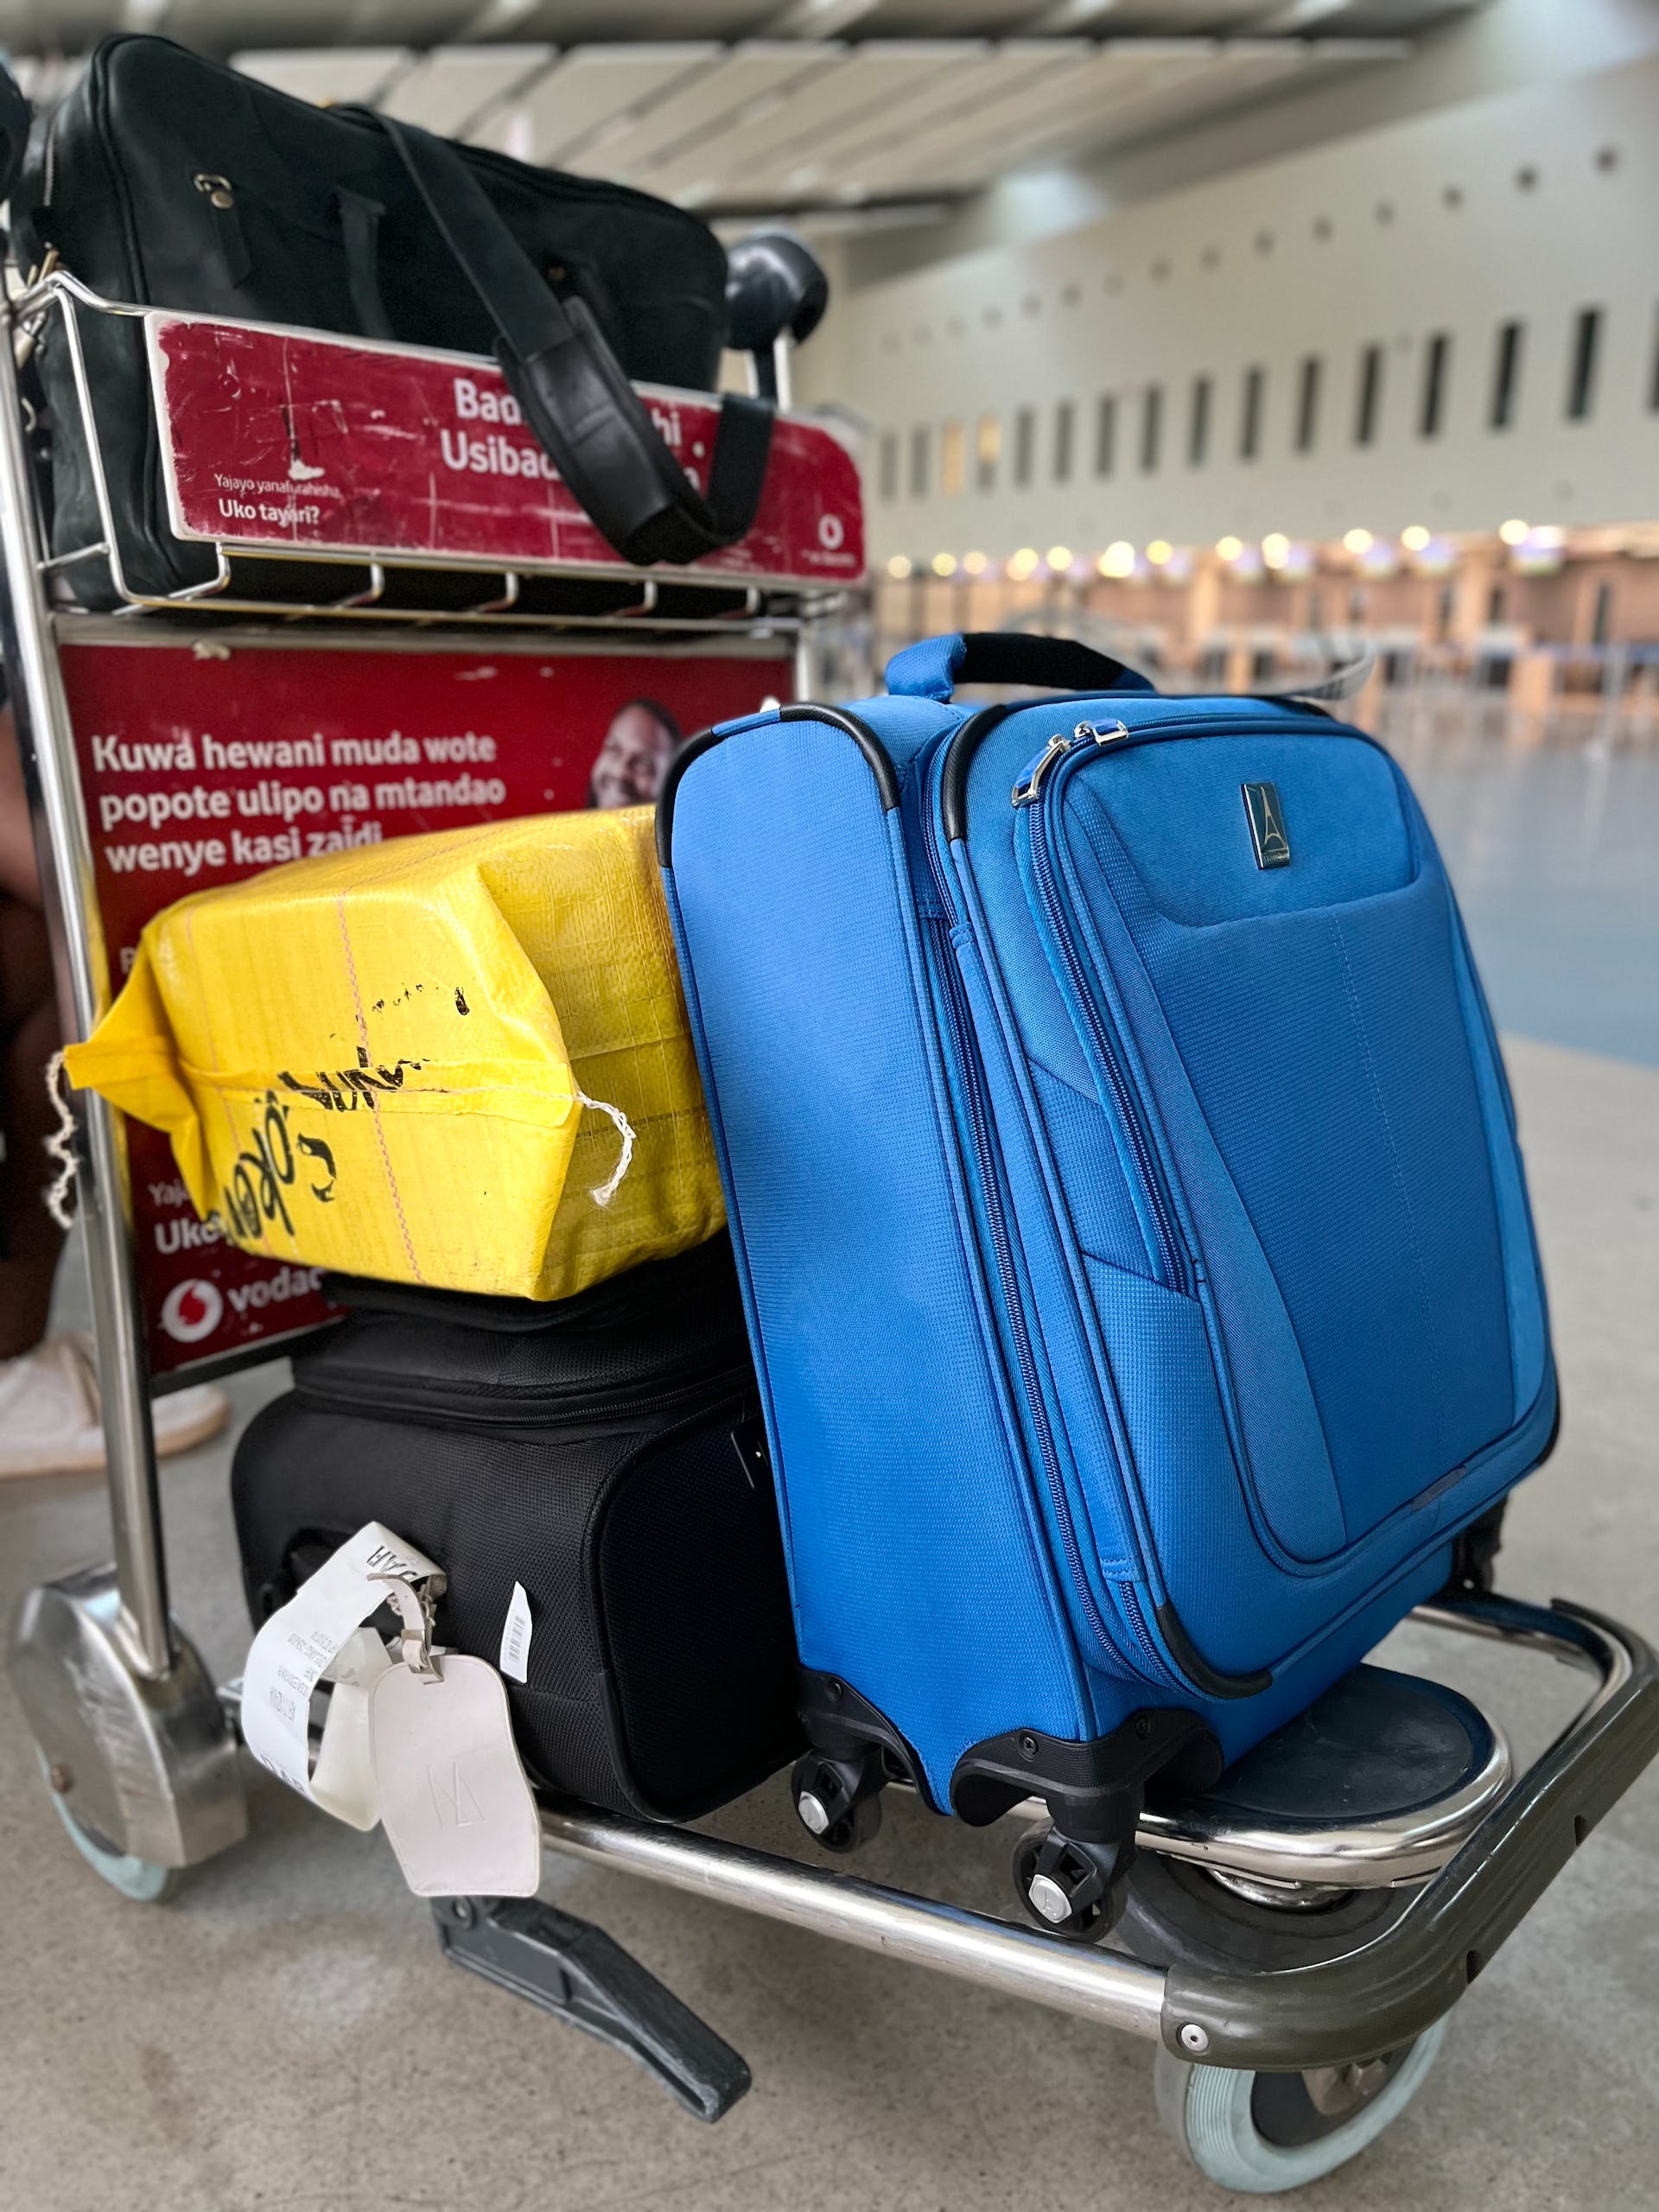 Luggage on a trolley at an airport | Source: Pexels